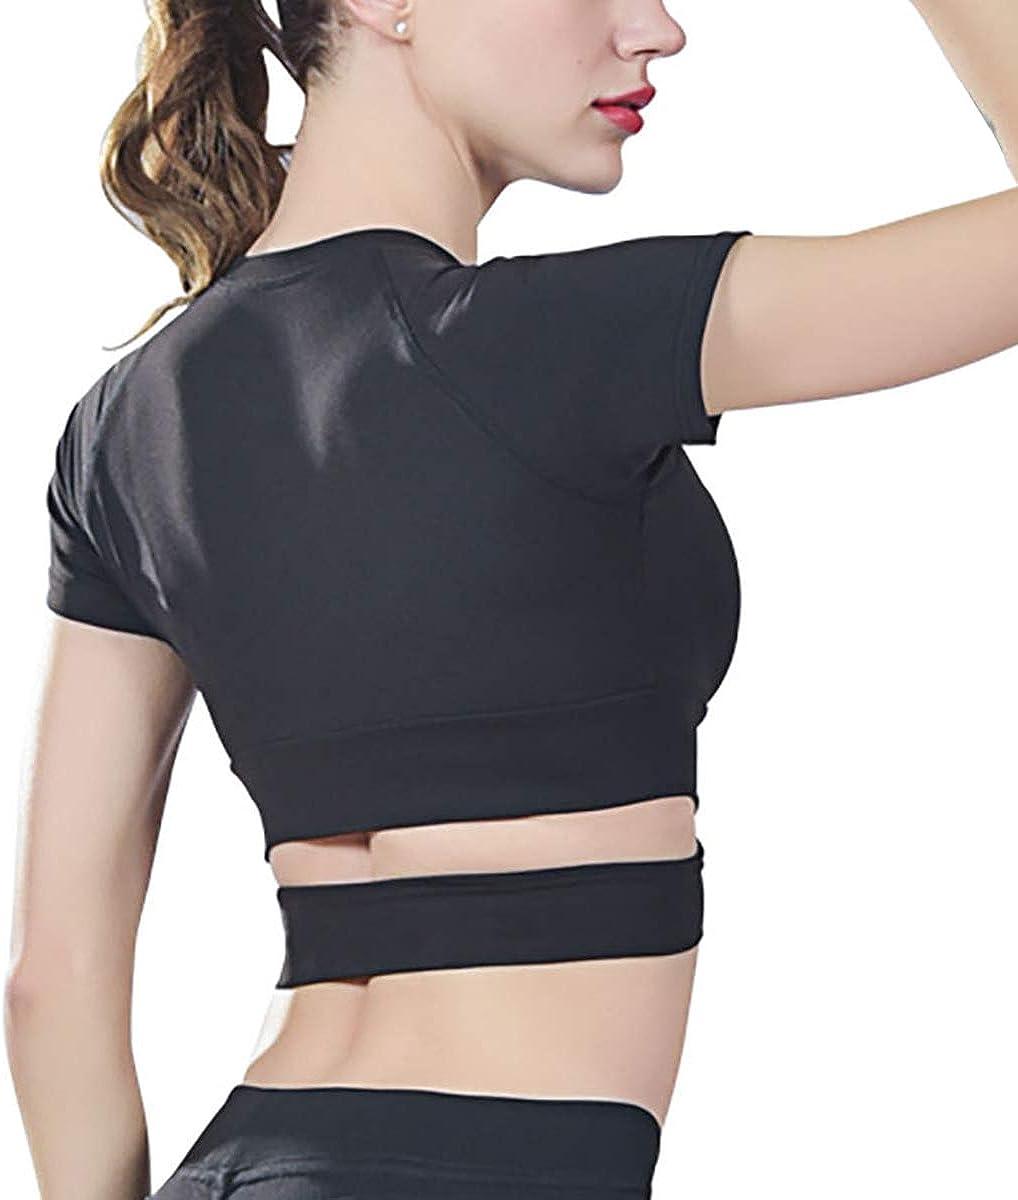 DREAM SLIM Workout Crop Tops for Women Sexy Tummy Cross Dance Yoga Tops  Slim Fit Stretchy Casual Cotton Short Sleeve Shirts Black Medium